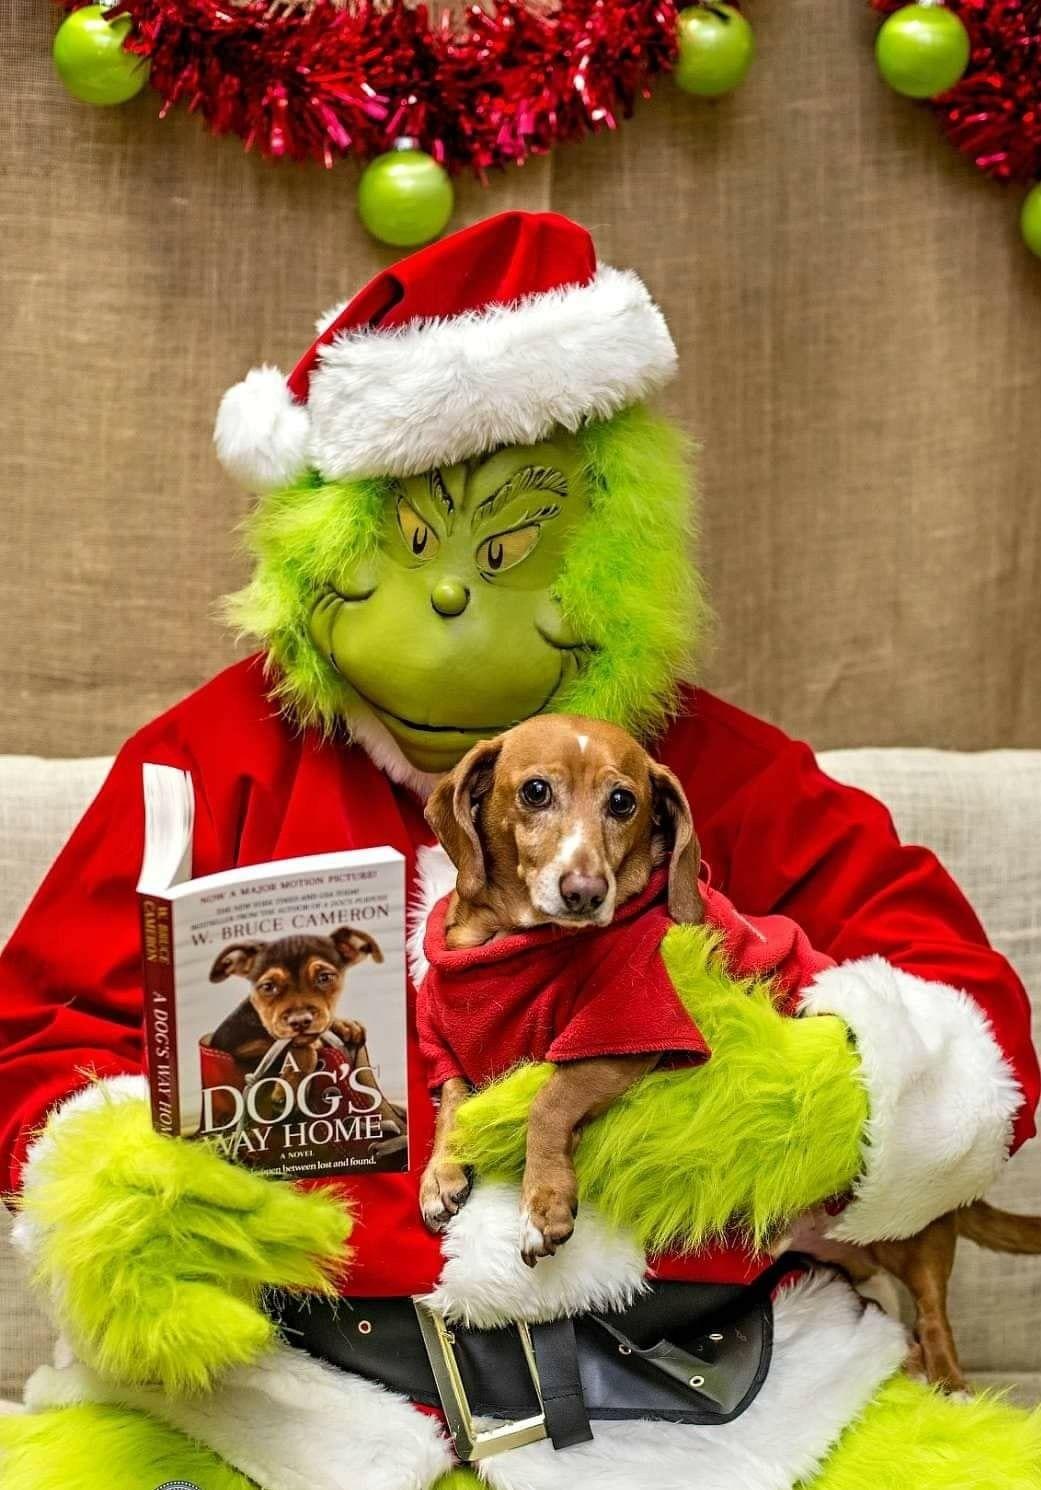 Even the Grinch thinks A Dog's Way Home is the perfect Christmas